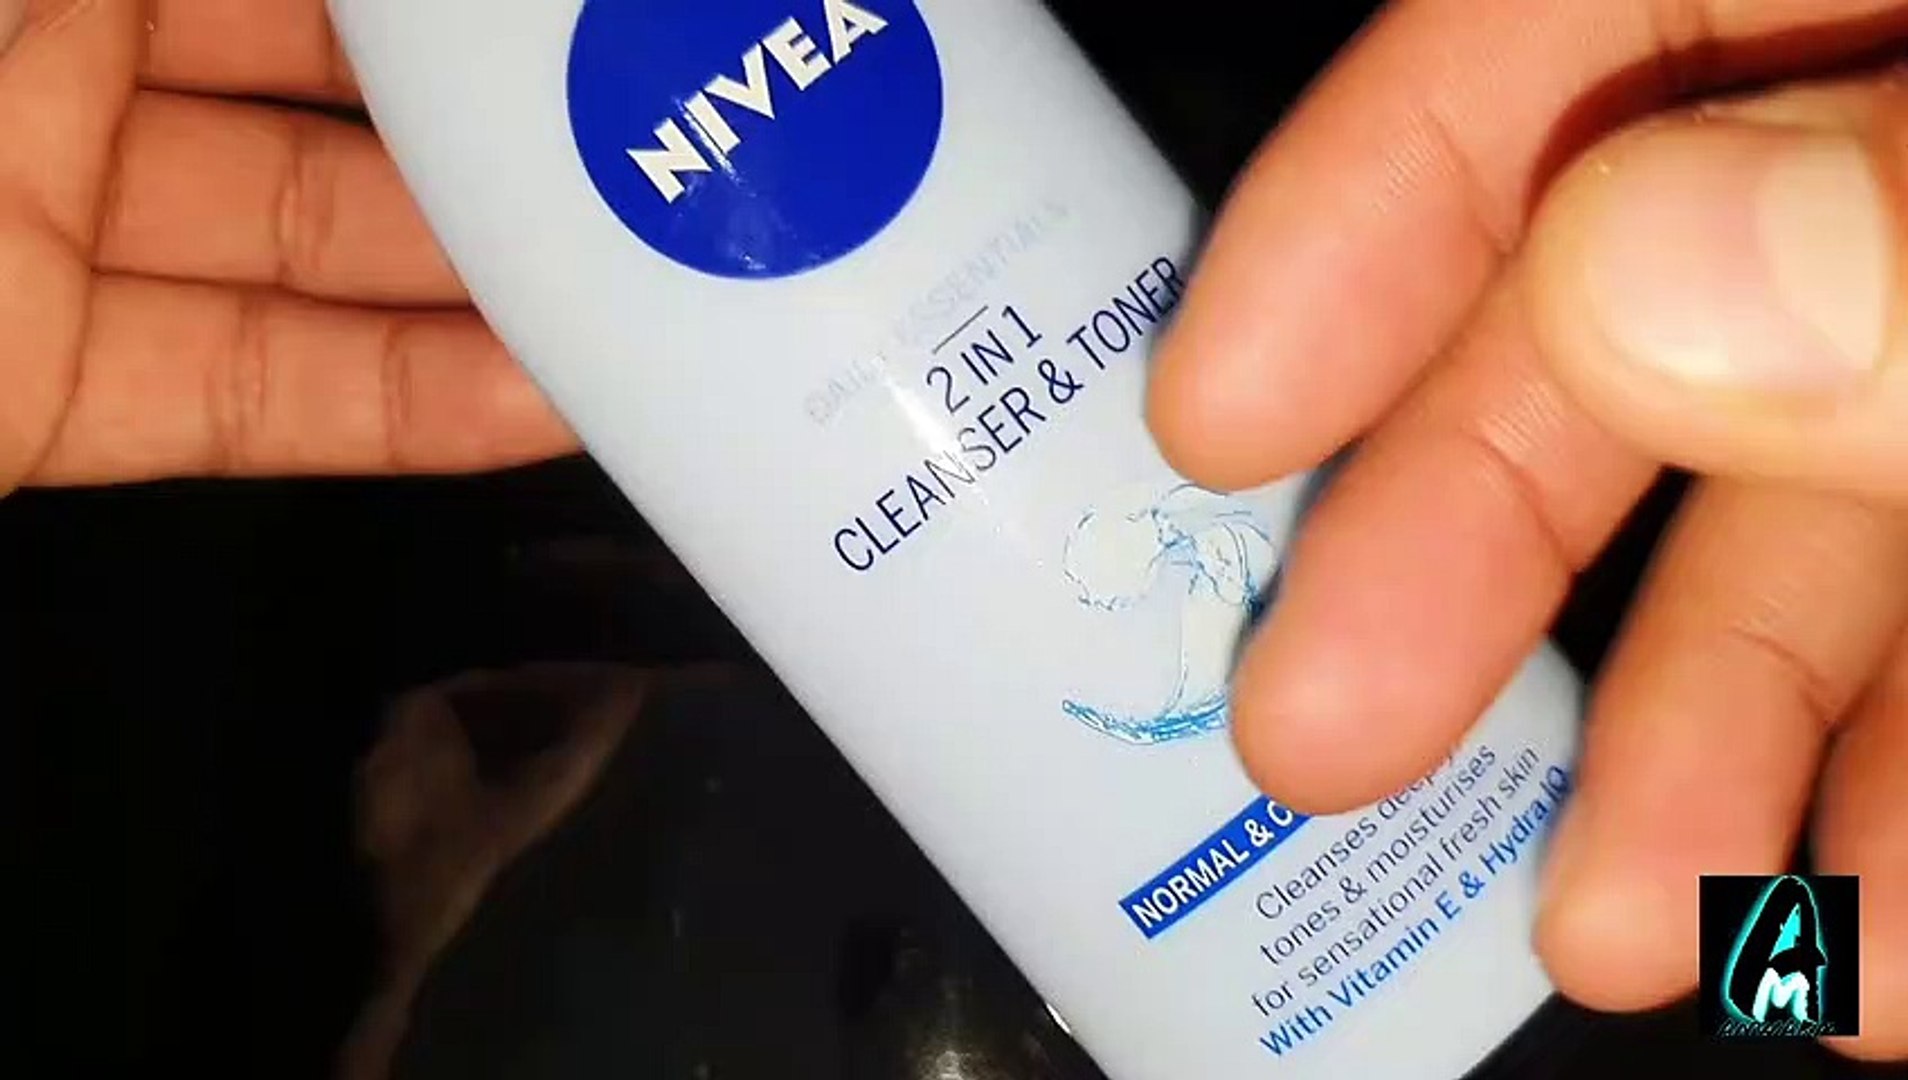 Nivea Daily Essentials 2in1 Cleanser Toner (Review) - video Dailymotion